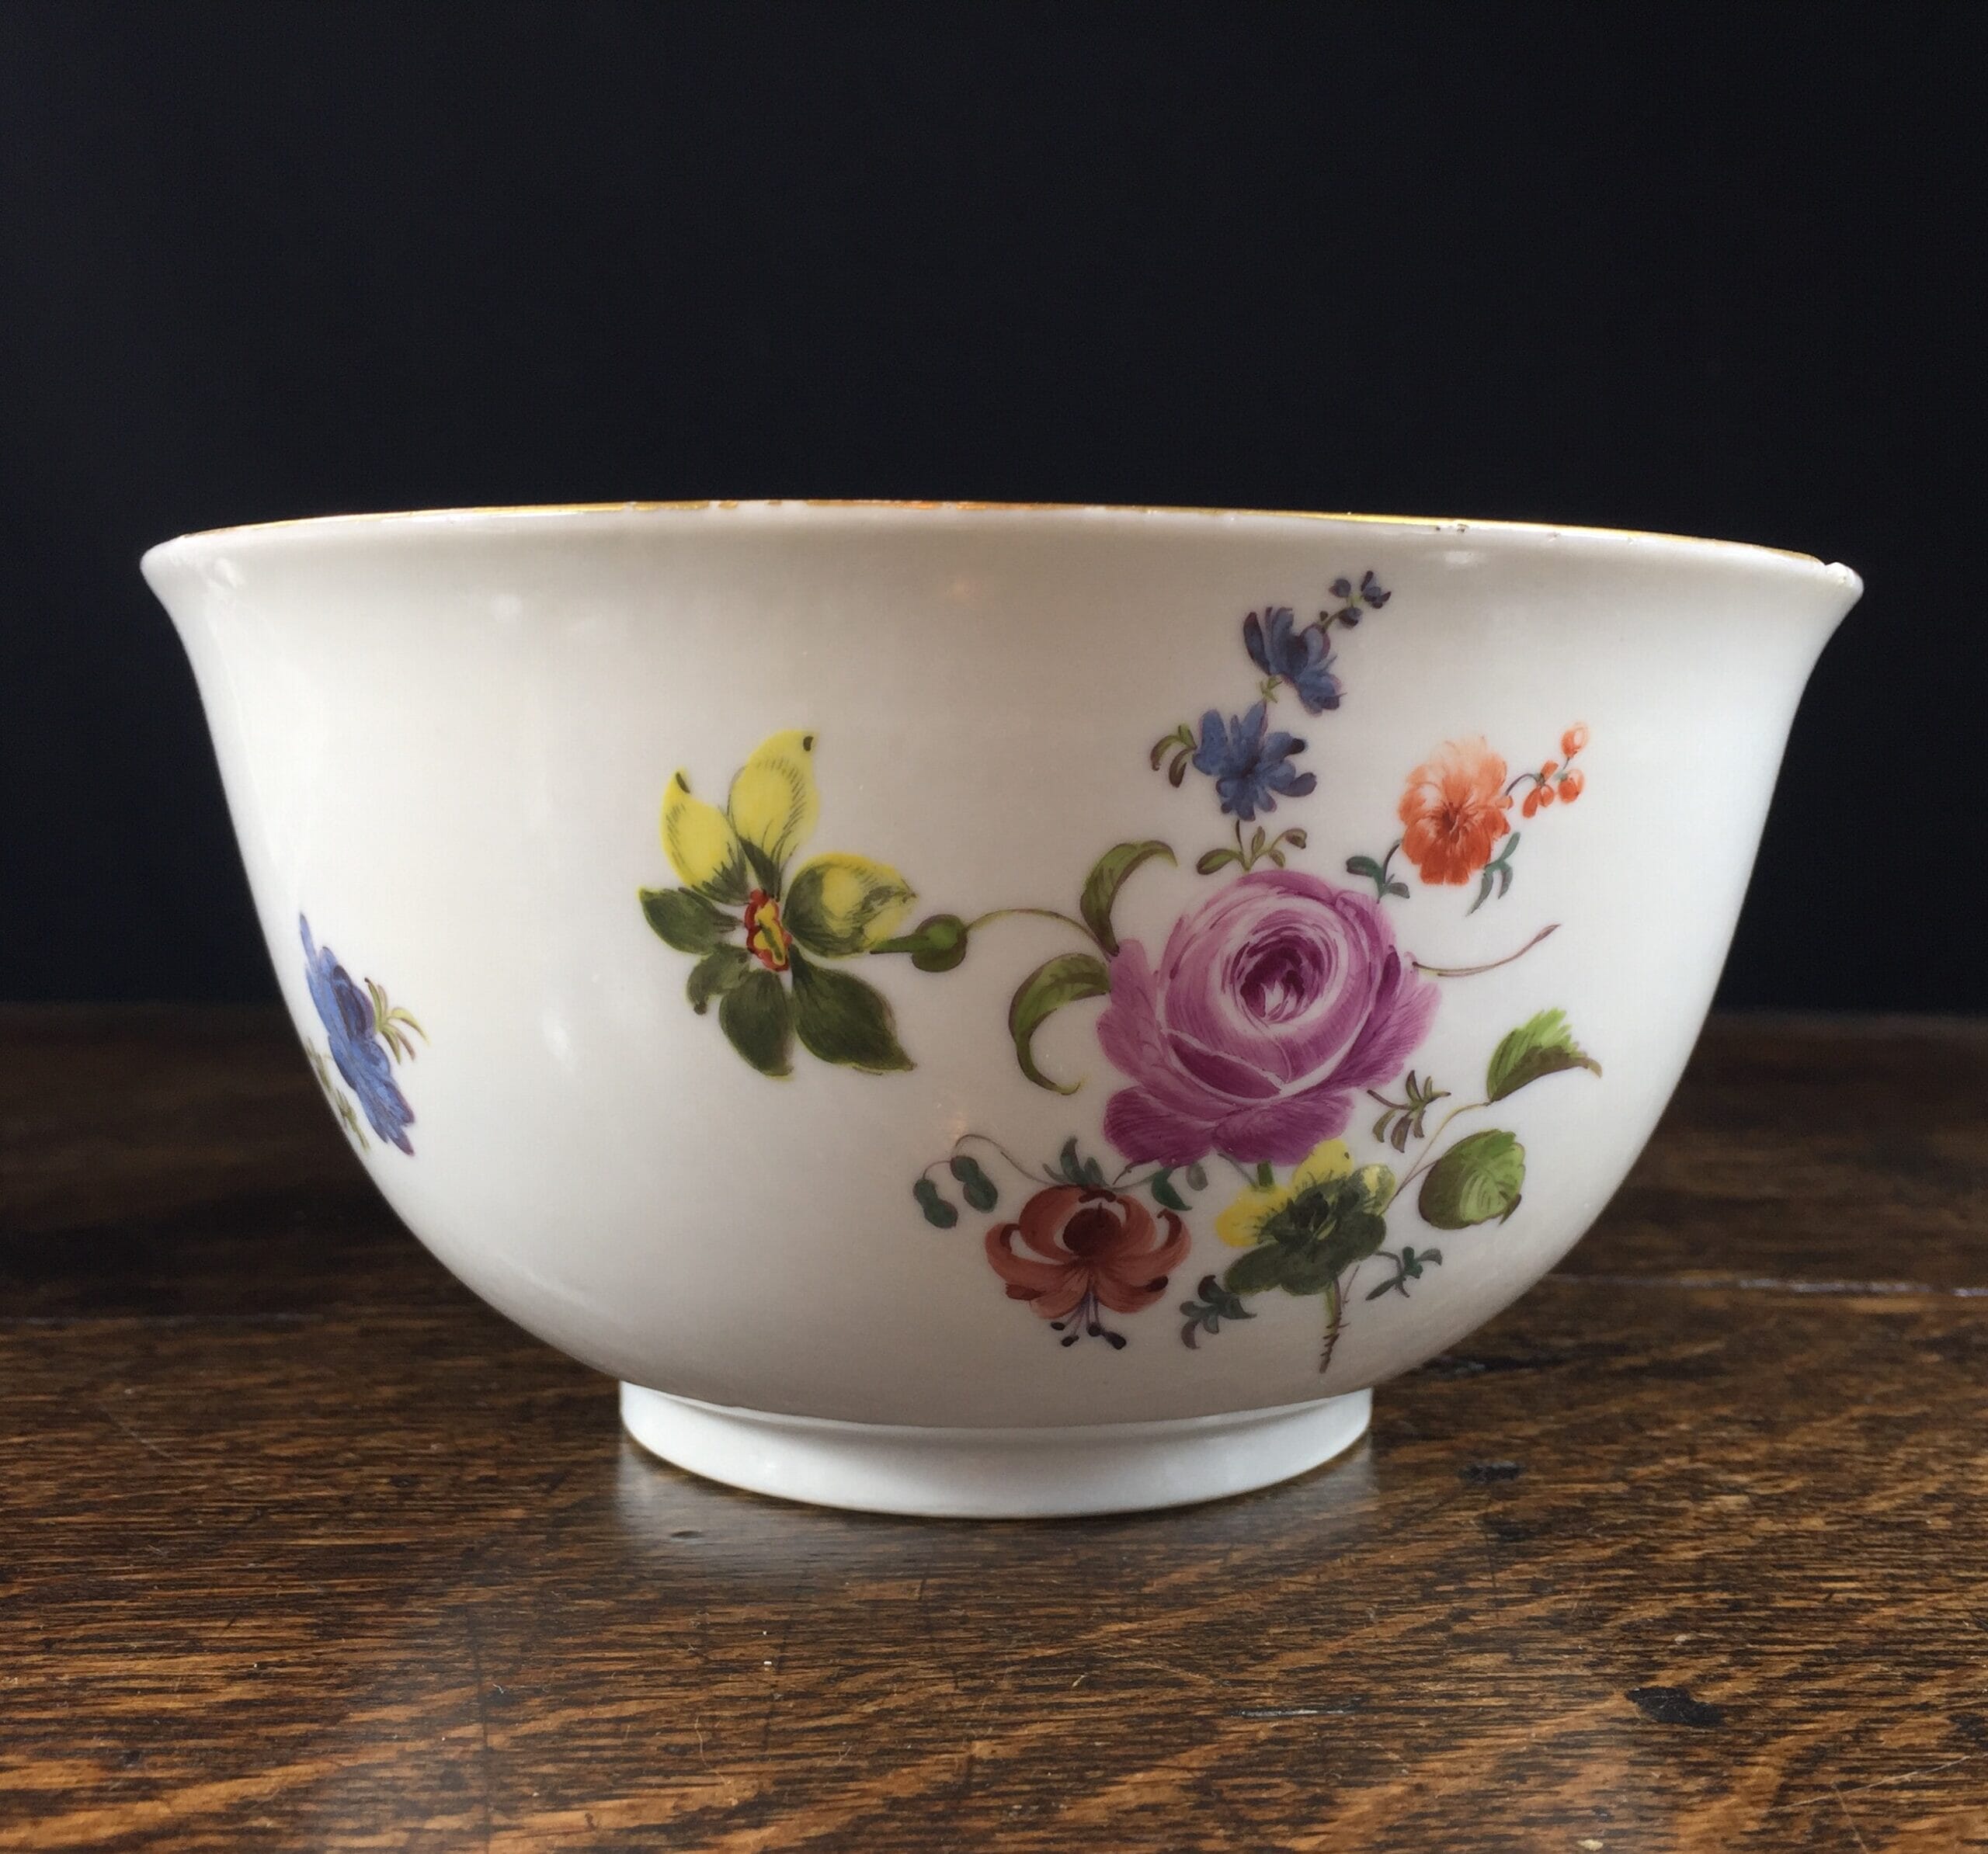 Meissen waste bowl painted with flowers, c. 1750 -0